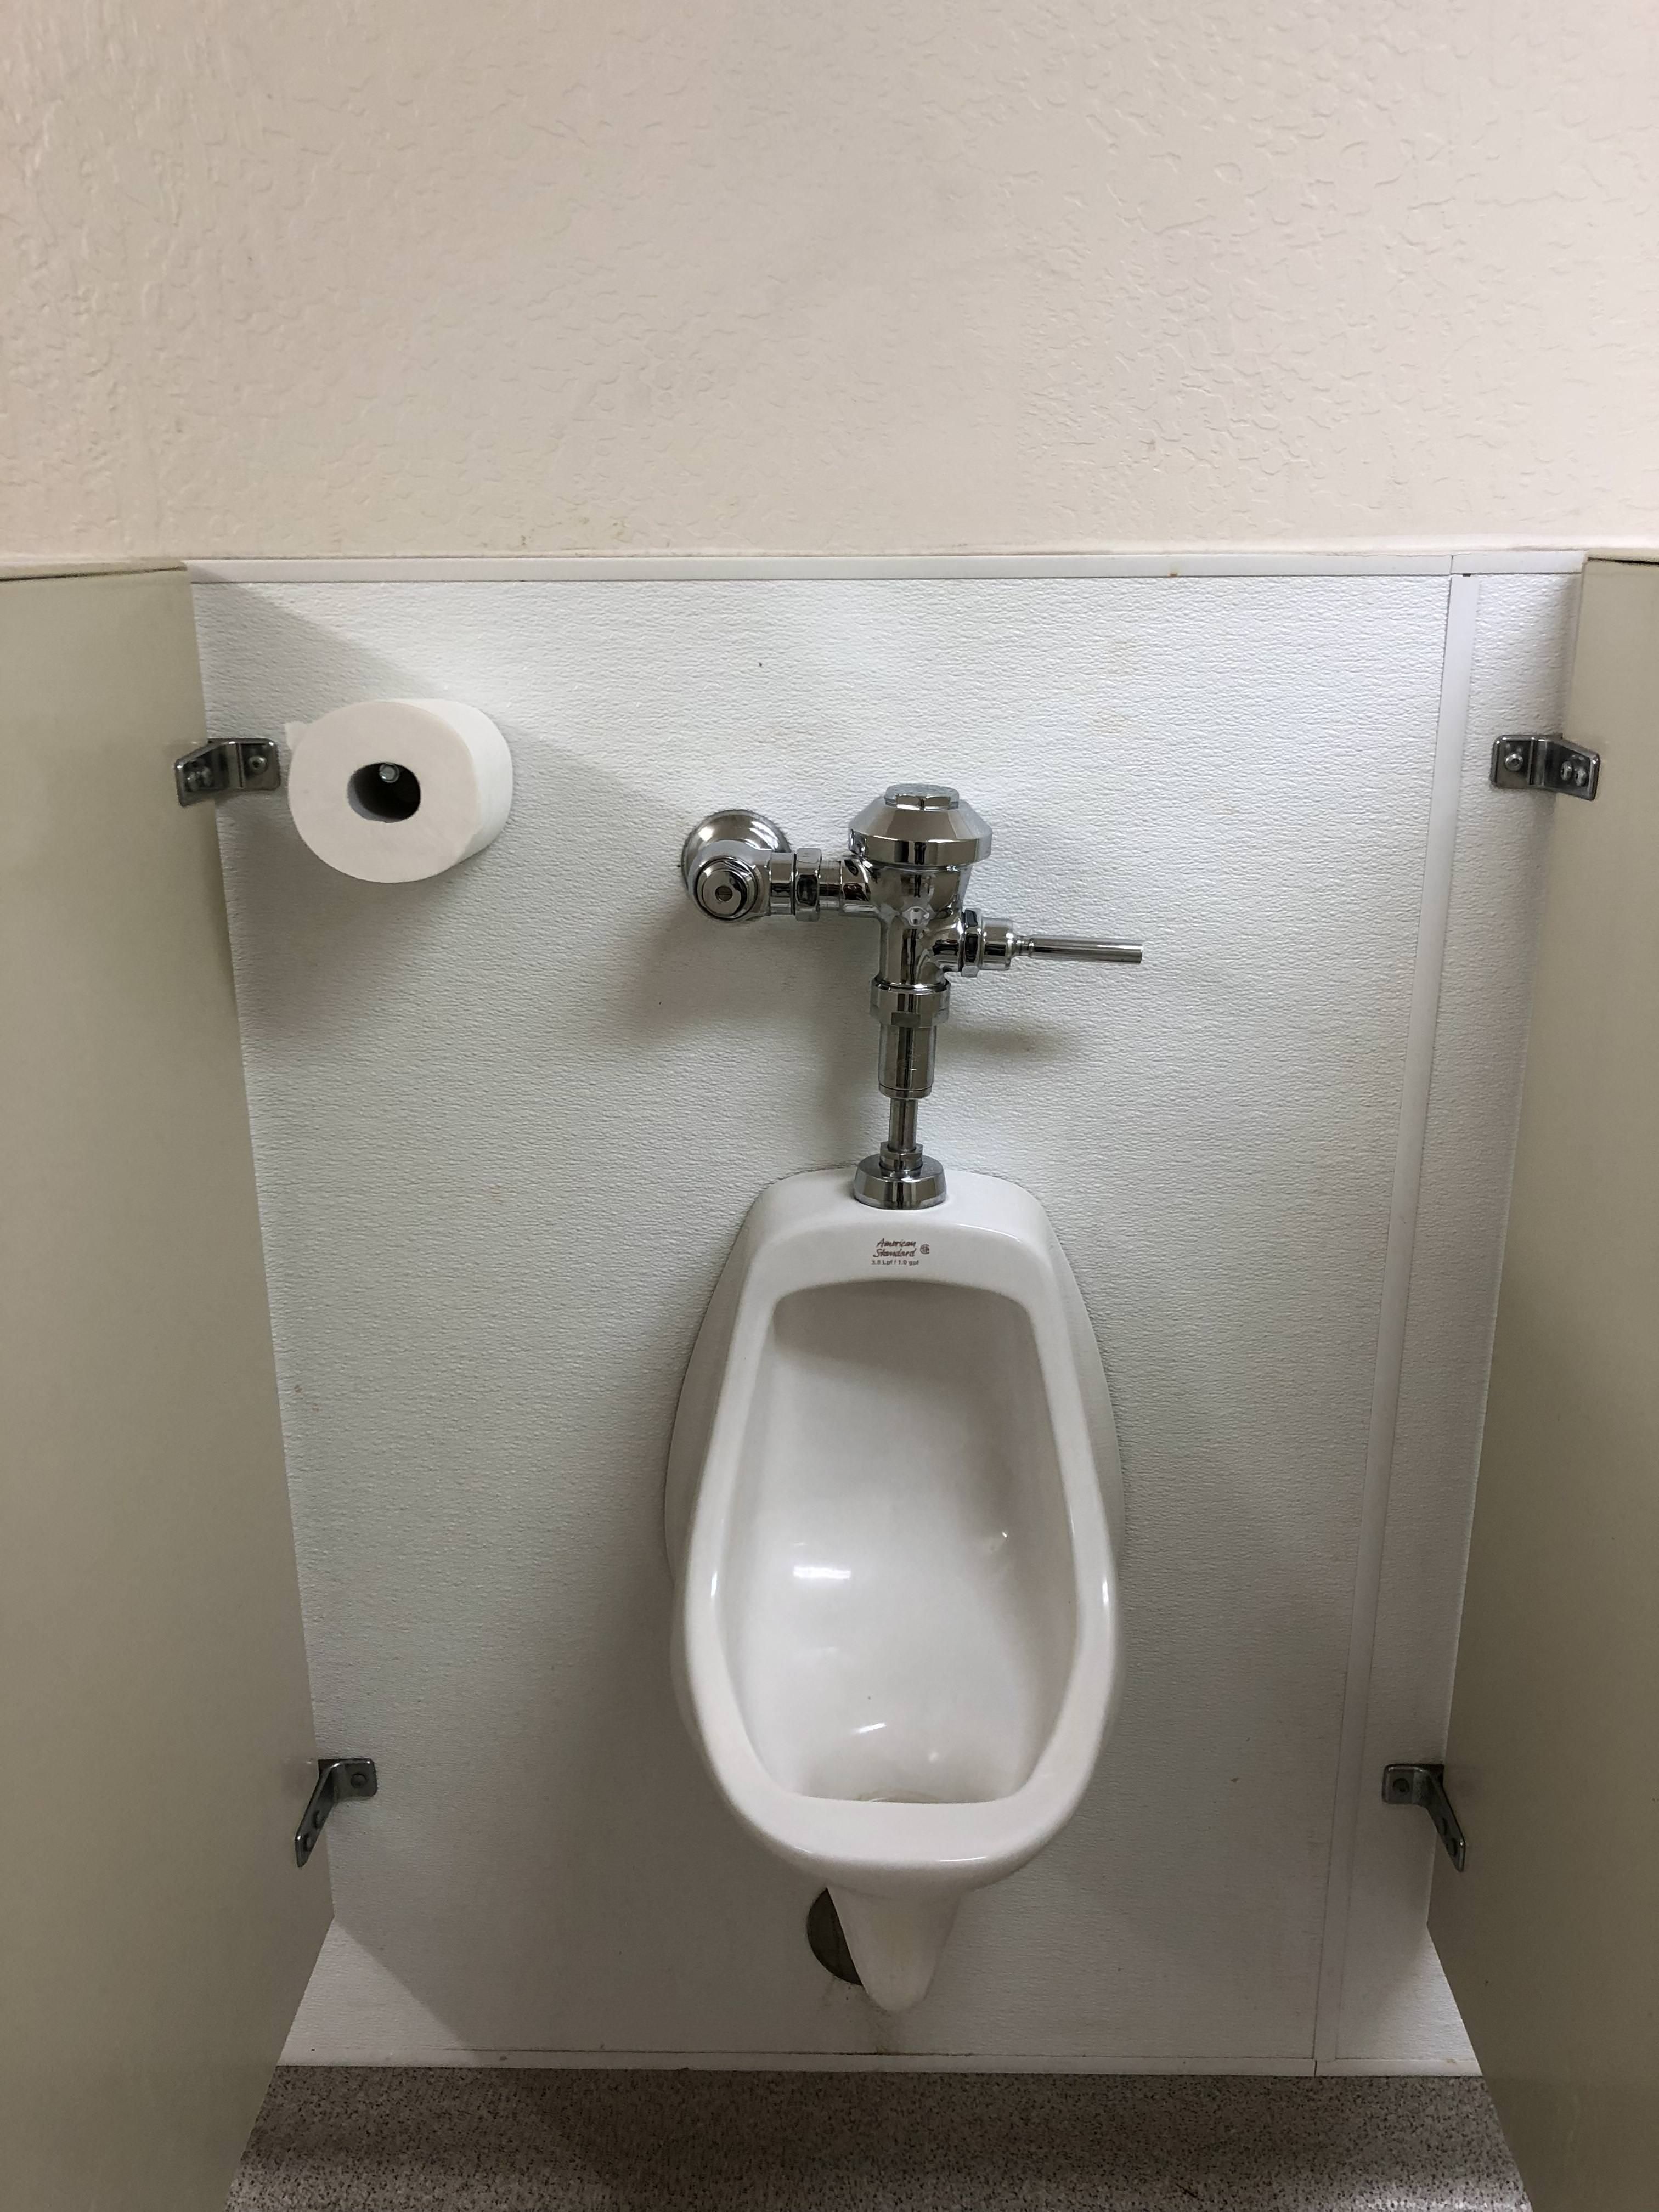 Female co-worker can't understand why we're laughing at how she cleaned the men's bathroom